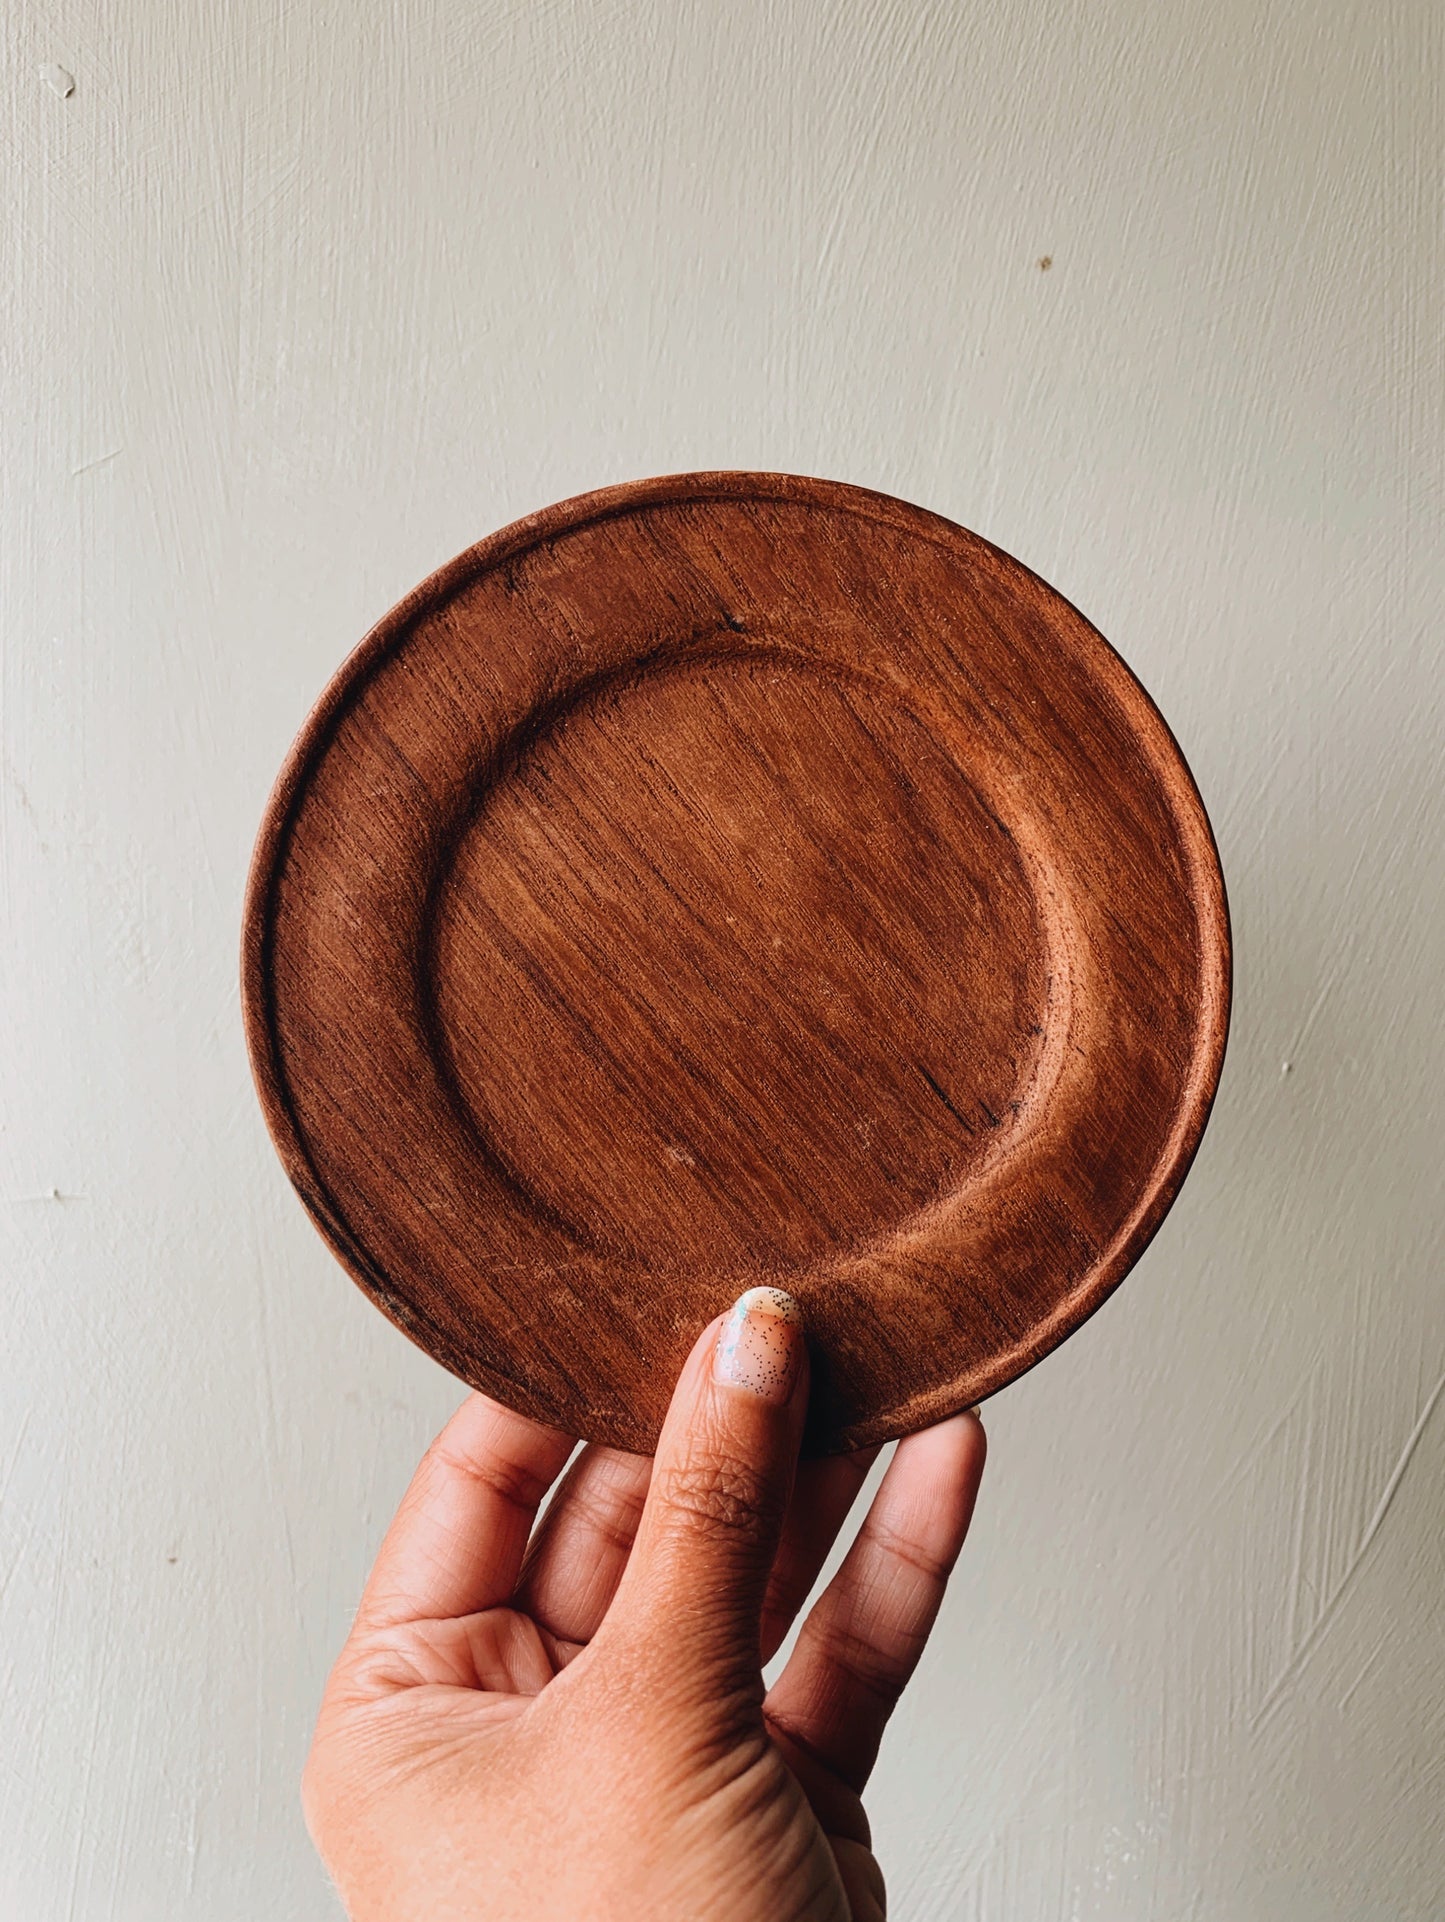 Rustic Wooden Plate